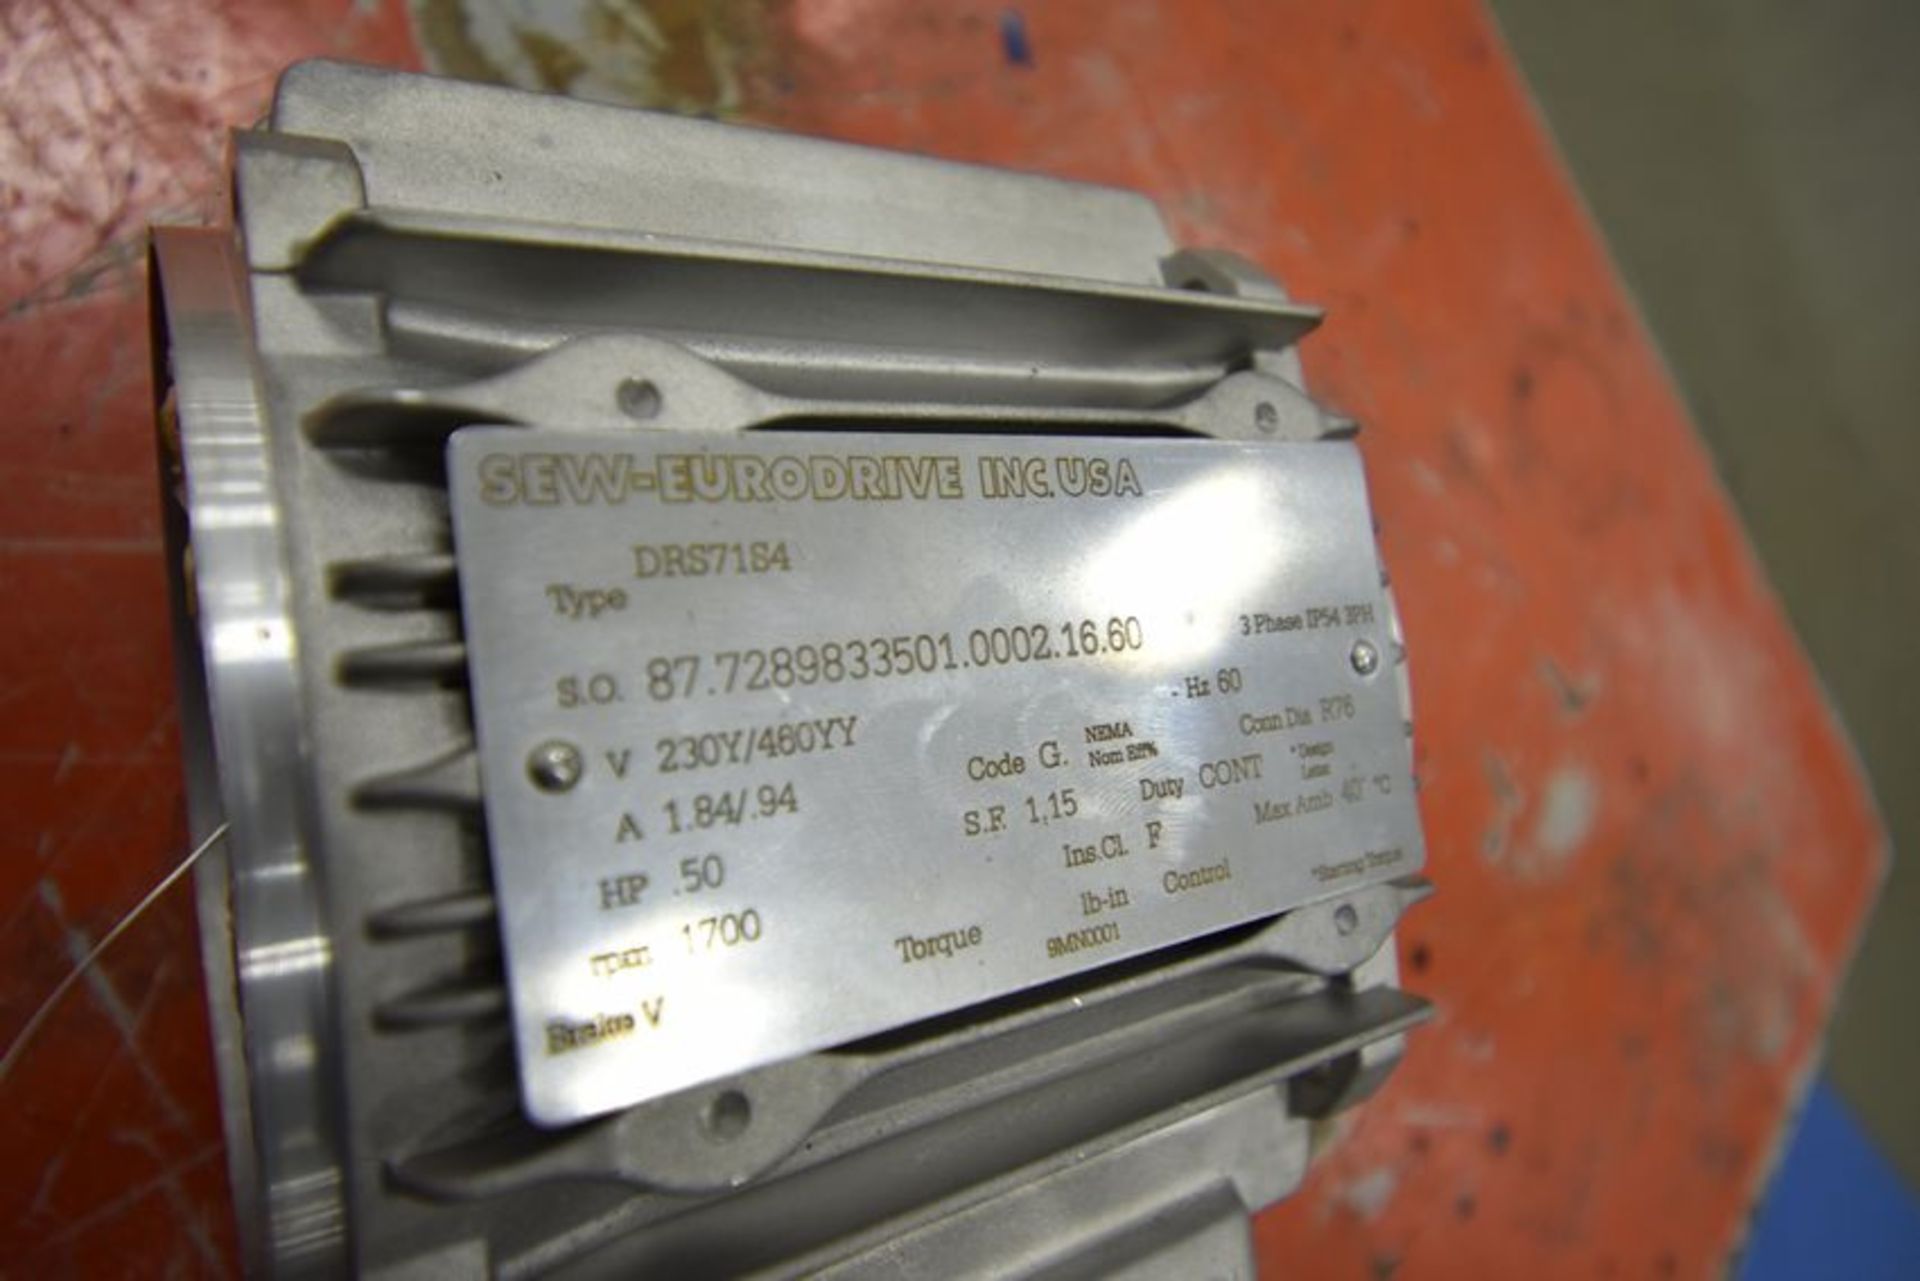 Sew-Eurodrive | SN:877289833501.0002.16.60 3phase volt-230y-460yy hp-50 rpm-7700 | MODEL# | - Image 2 of 6